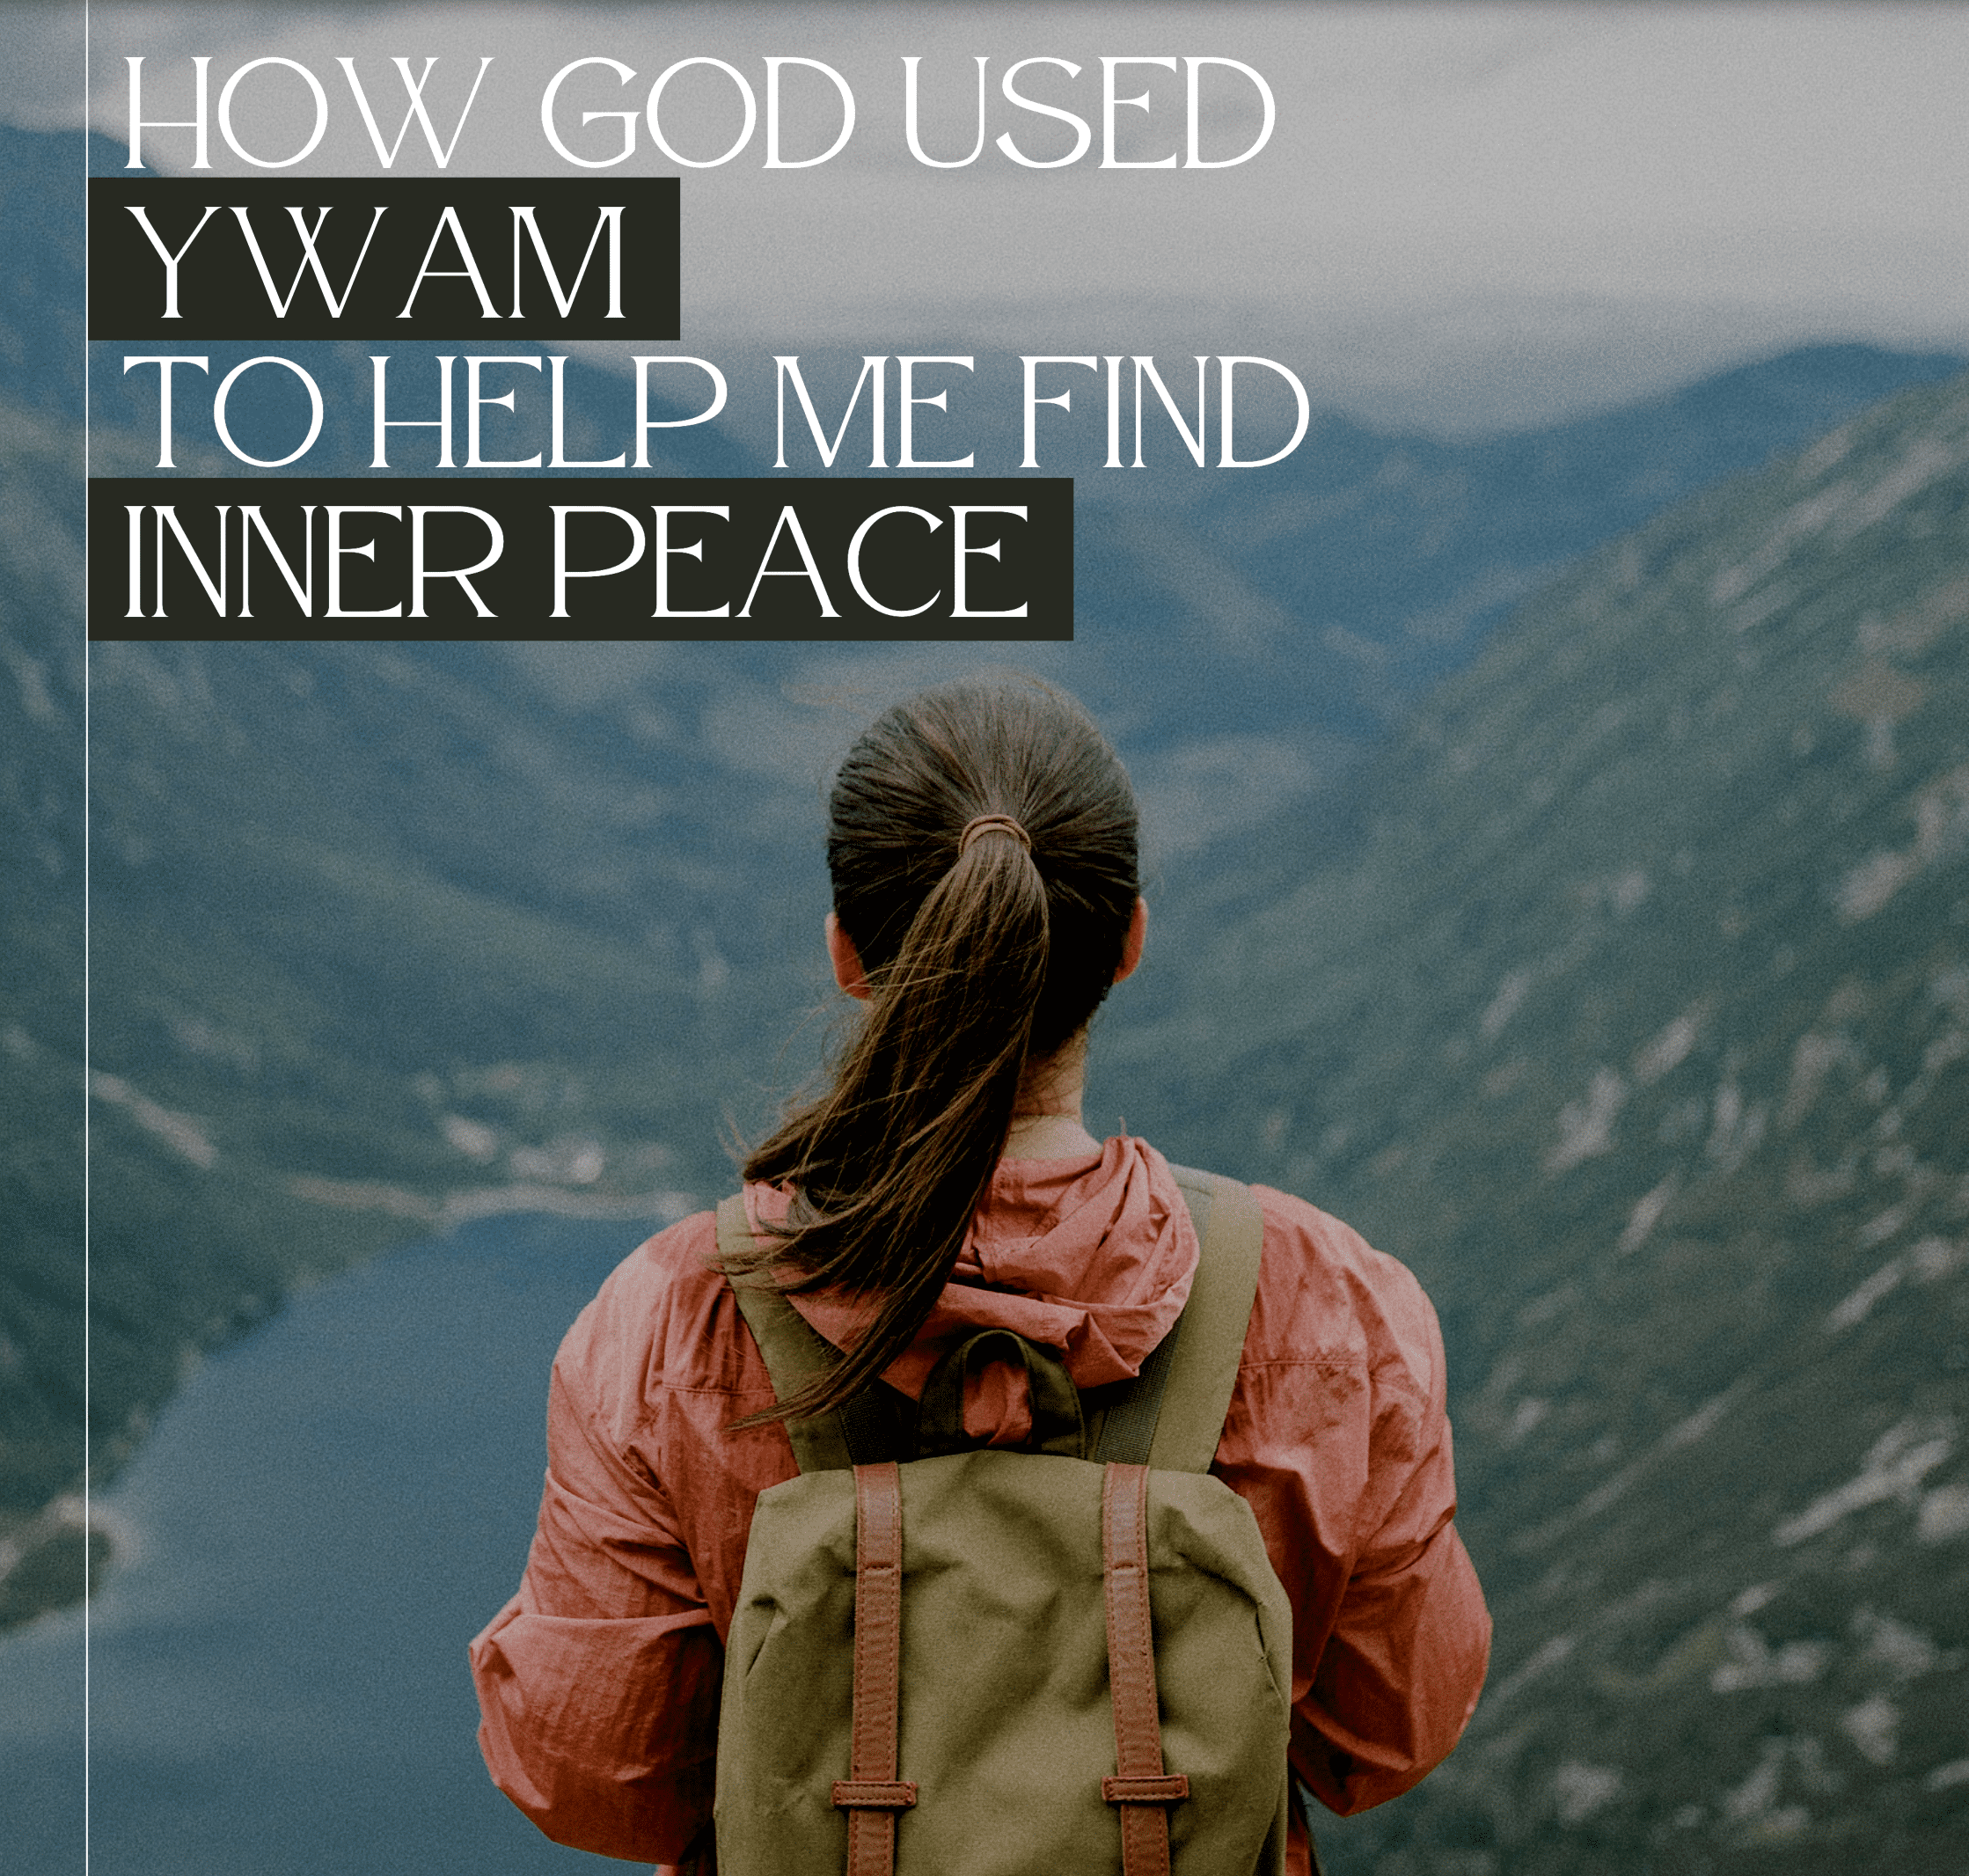 How God Used YWAM To Help Me Find Inner Peace 